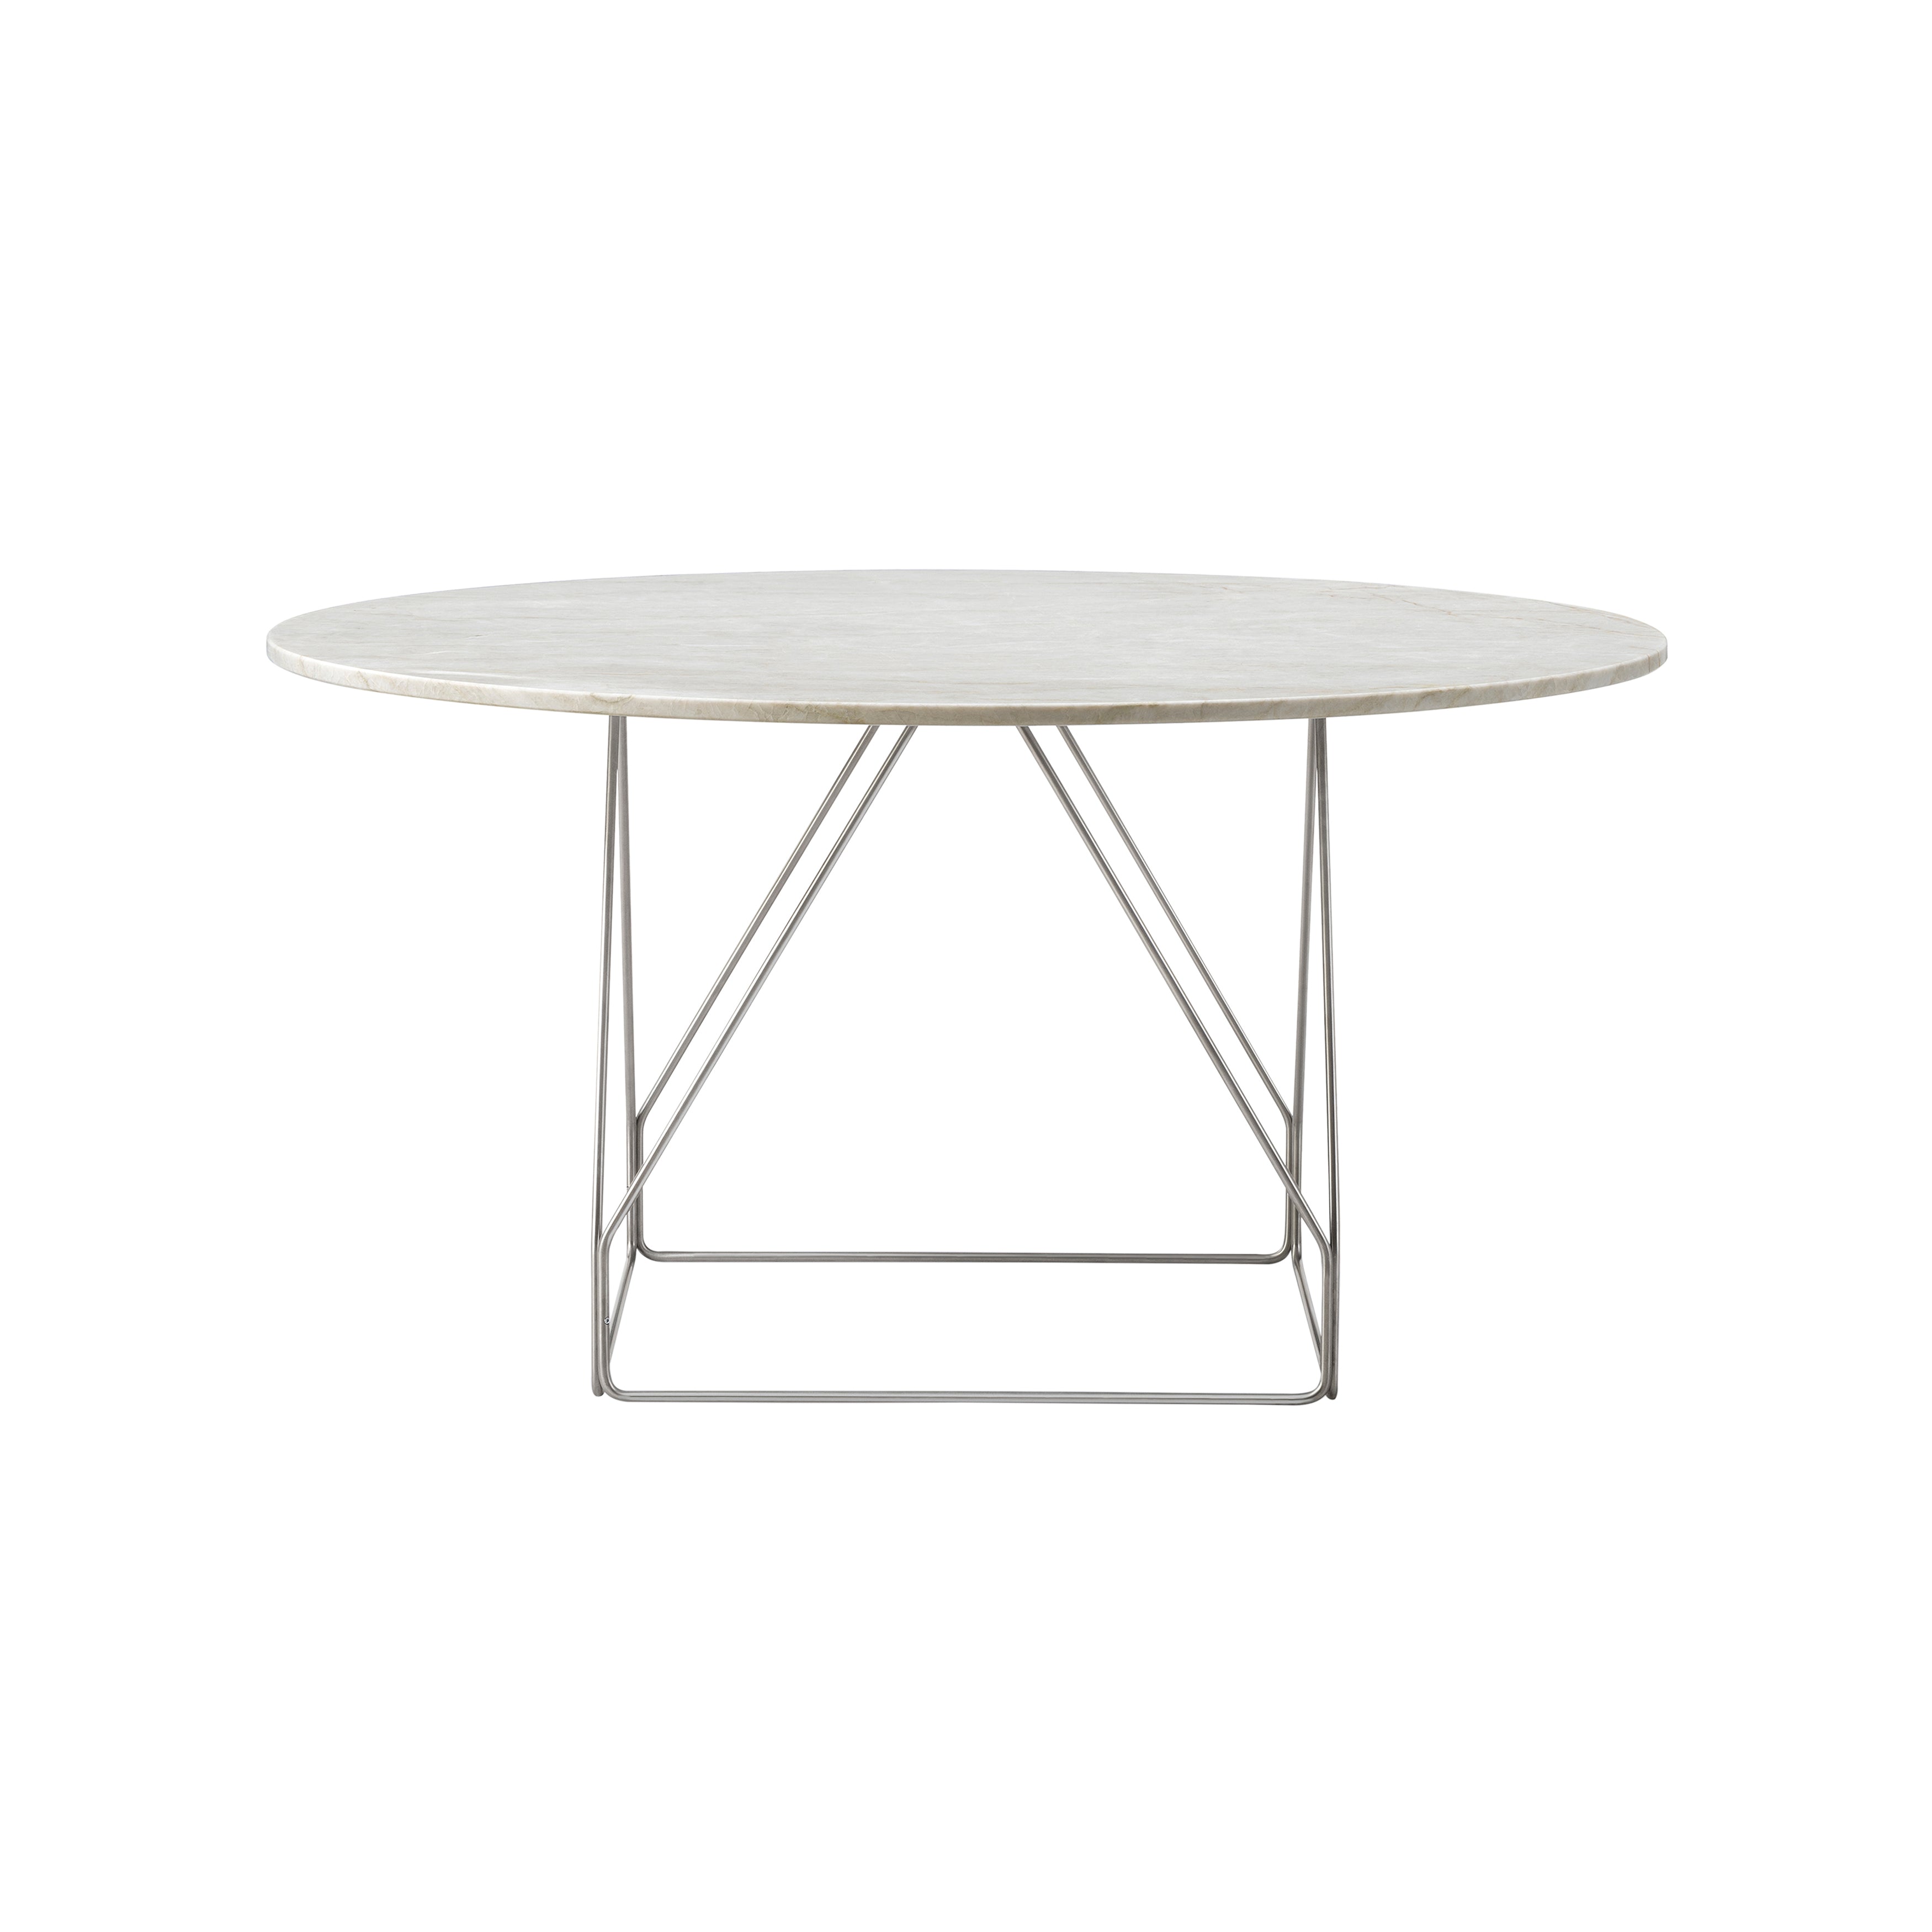 JG Table: Round + Ivory Quartzite + Stainless Steel